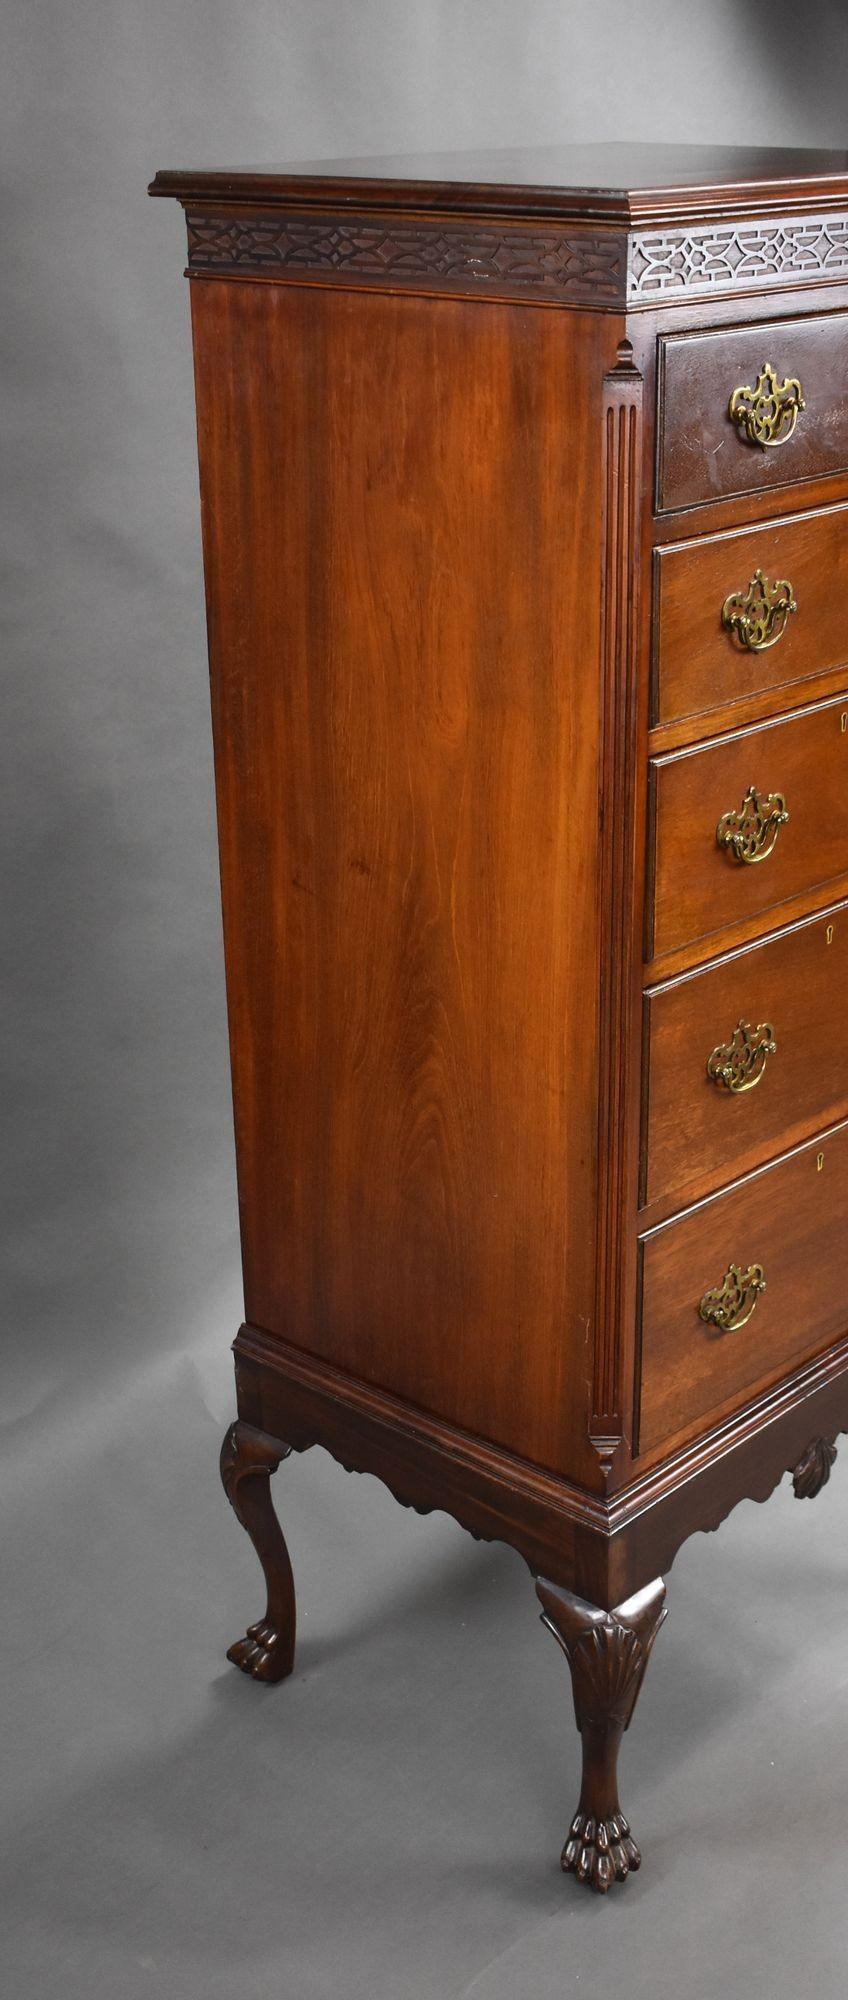 For sale is a good quality antique mahogany chest on stand, having a blind fretwork frieze above an arrangement of five drawers, each with brass handles. The chest base stands on elegant cabriole legs terminating on intricately carved paw feet. This